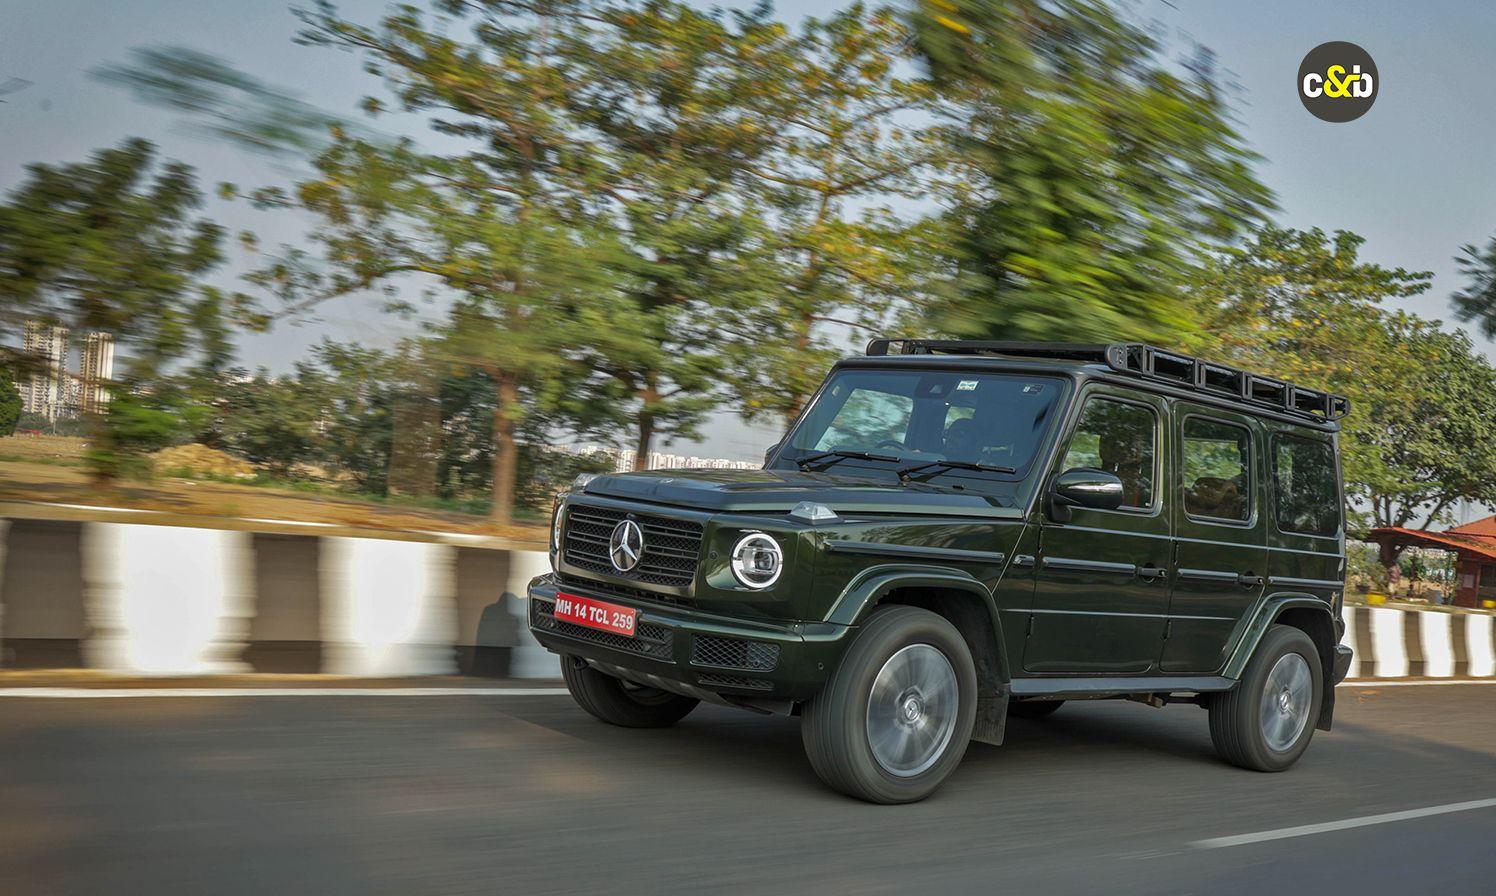 The Mercedes-Benz G 400d is a Rs. 1 crore more expensive than the older G 350d. But is that premium justified? Is it really worth the Rs. 2.55 crore sticker price? We spent a day with the G-Wagen to answer these questions. 